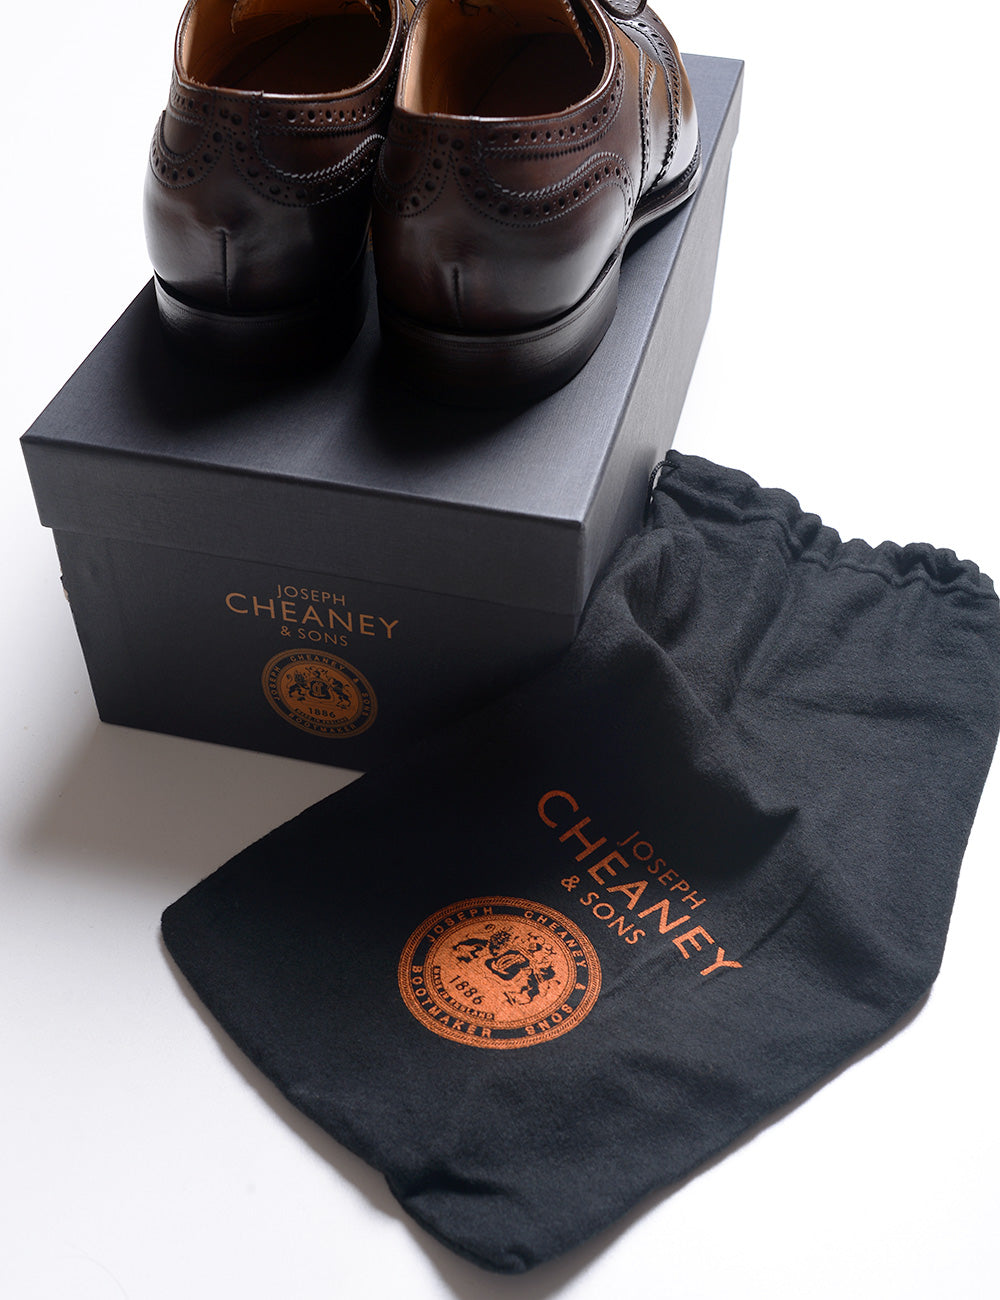 Photo of Joseph Cheaney Arthur III Oxford Brogue  in Mocha Calf Leather on top of their box next to the branded dust bag the shoes are sold with. 